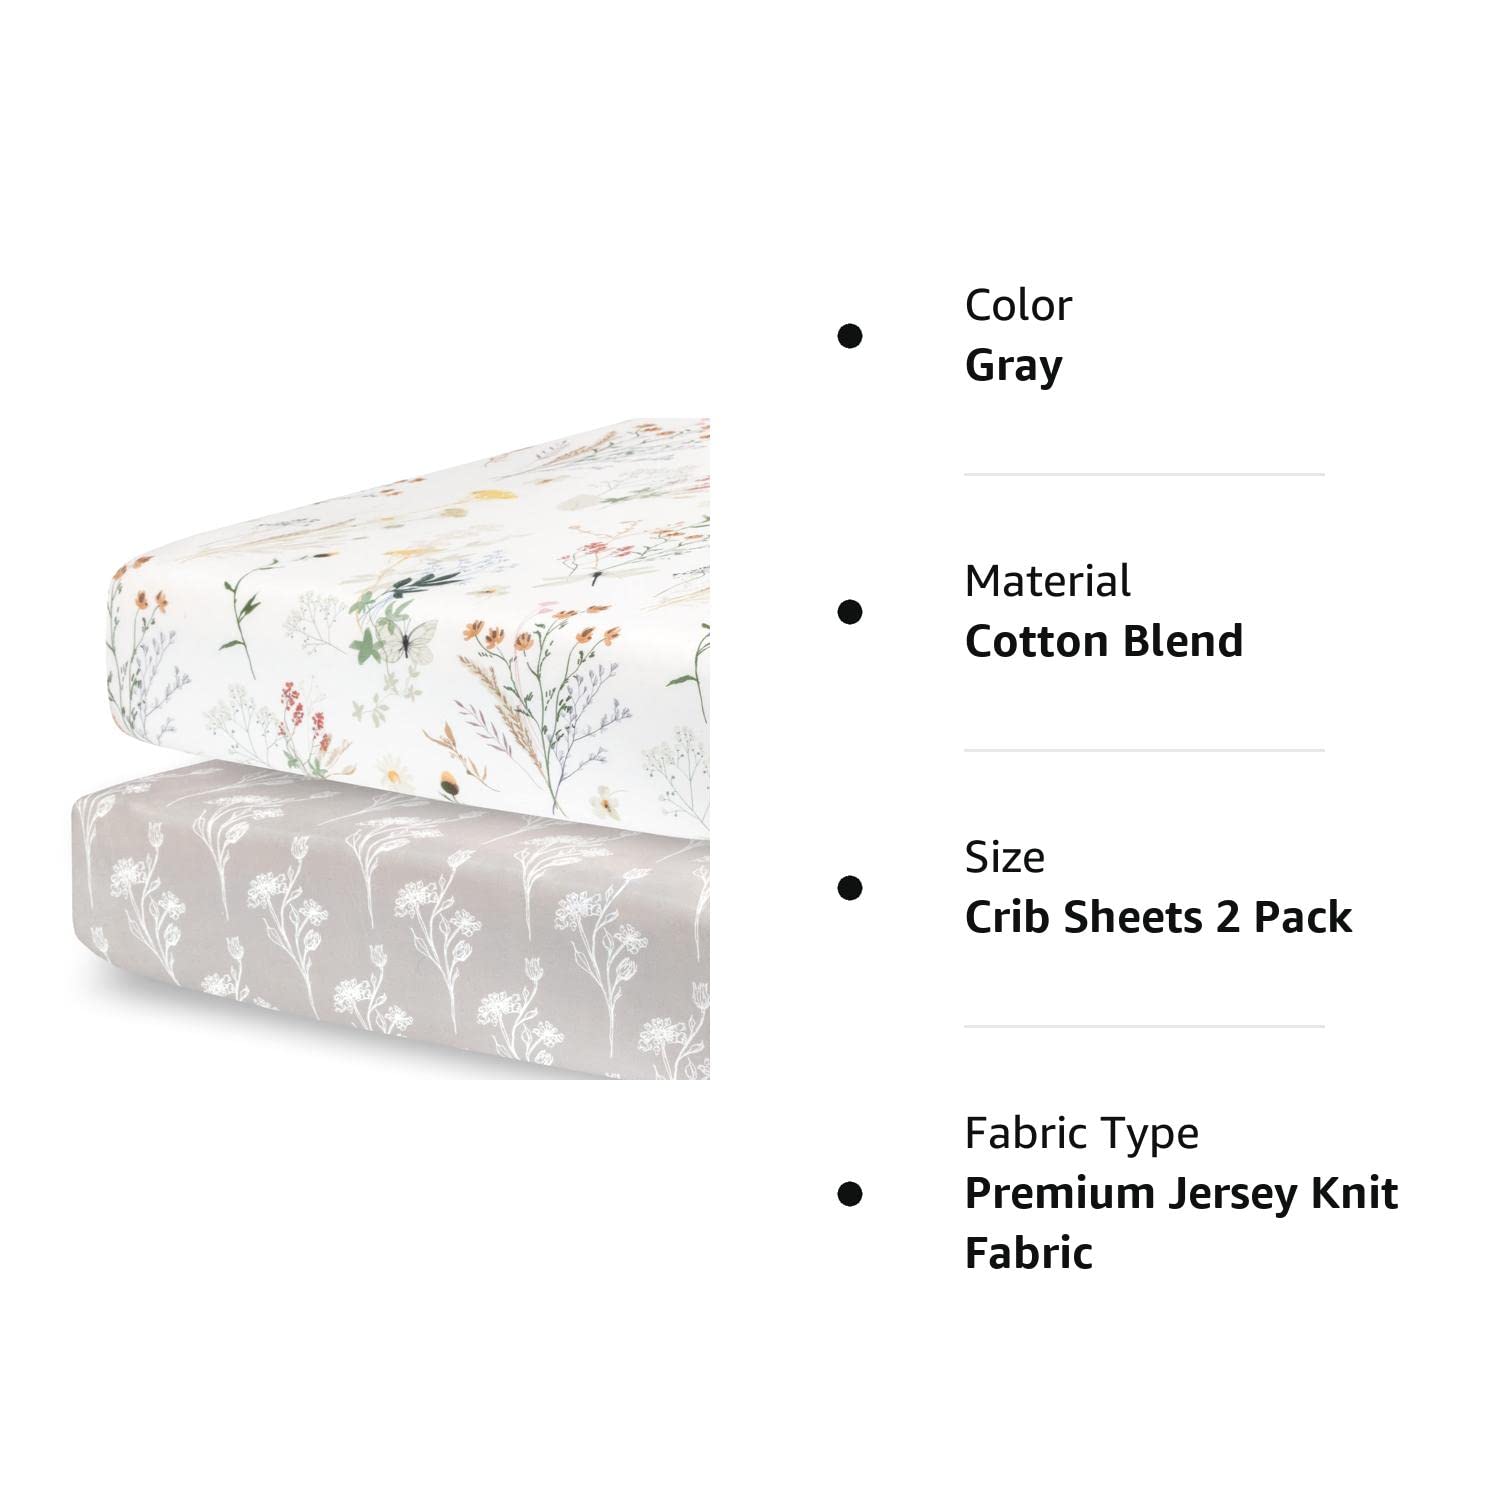 Pobibaby - 2 Pack Premium Fitted Baby Girl Crib Sheets for Standard Crib Mattress - Ultra-Soft Jersey Knit, Safe and Snug, and Stylish Floral Crib Sheet (Wildflower)